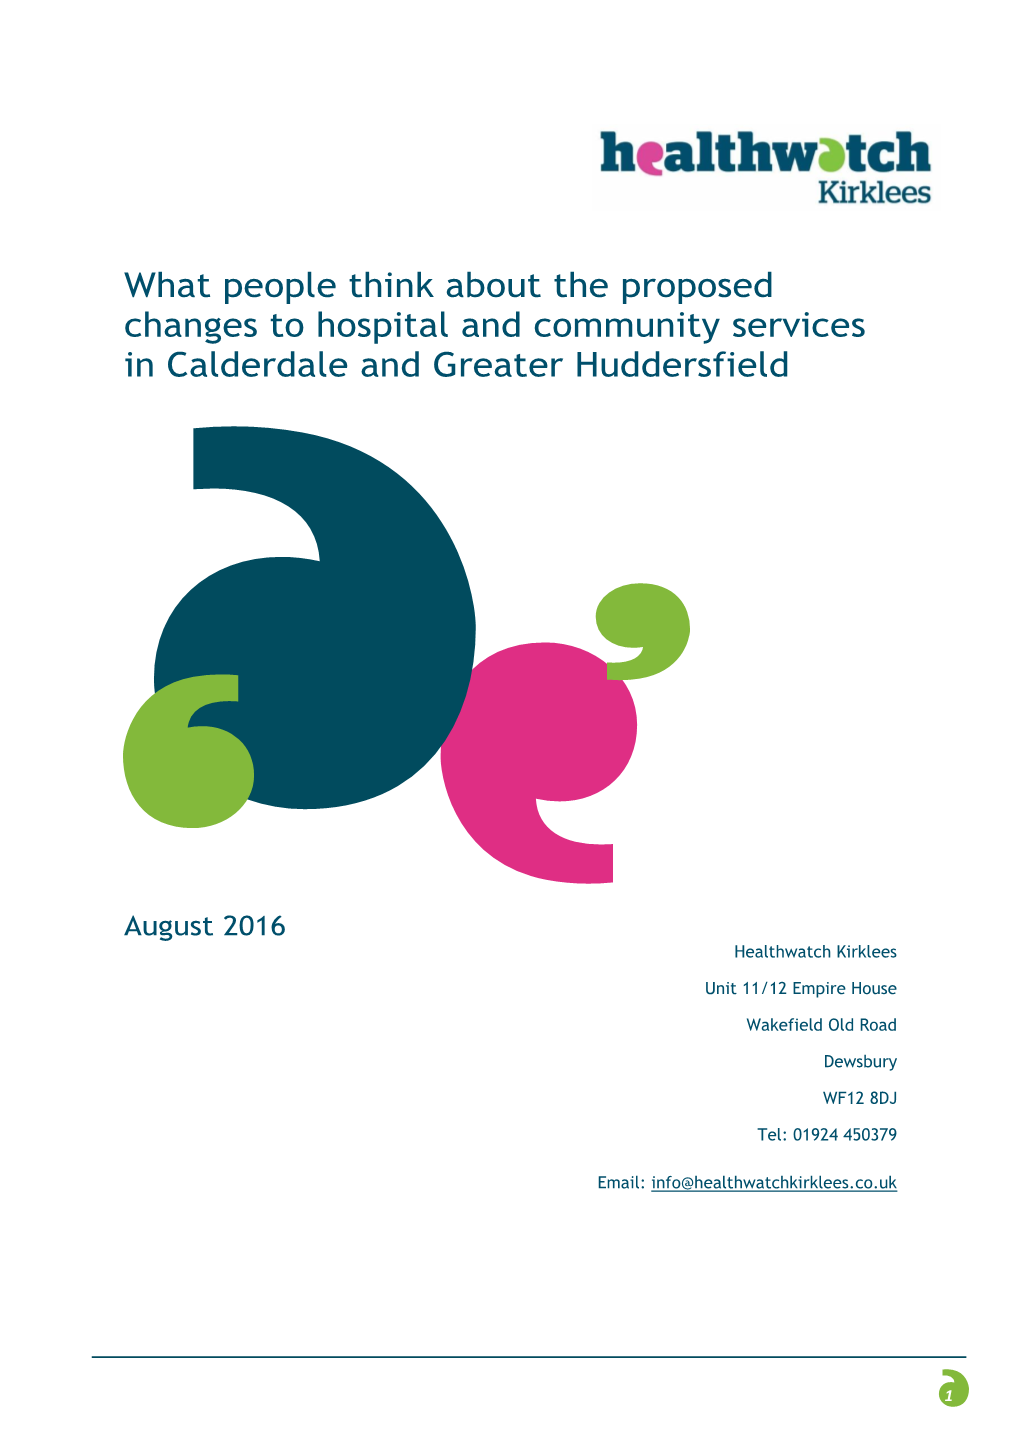 What People Think About the Proposed Changes to Hospital and Community Services in Calderdale and Greater Huddersfield